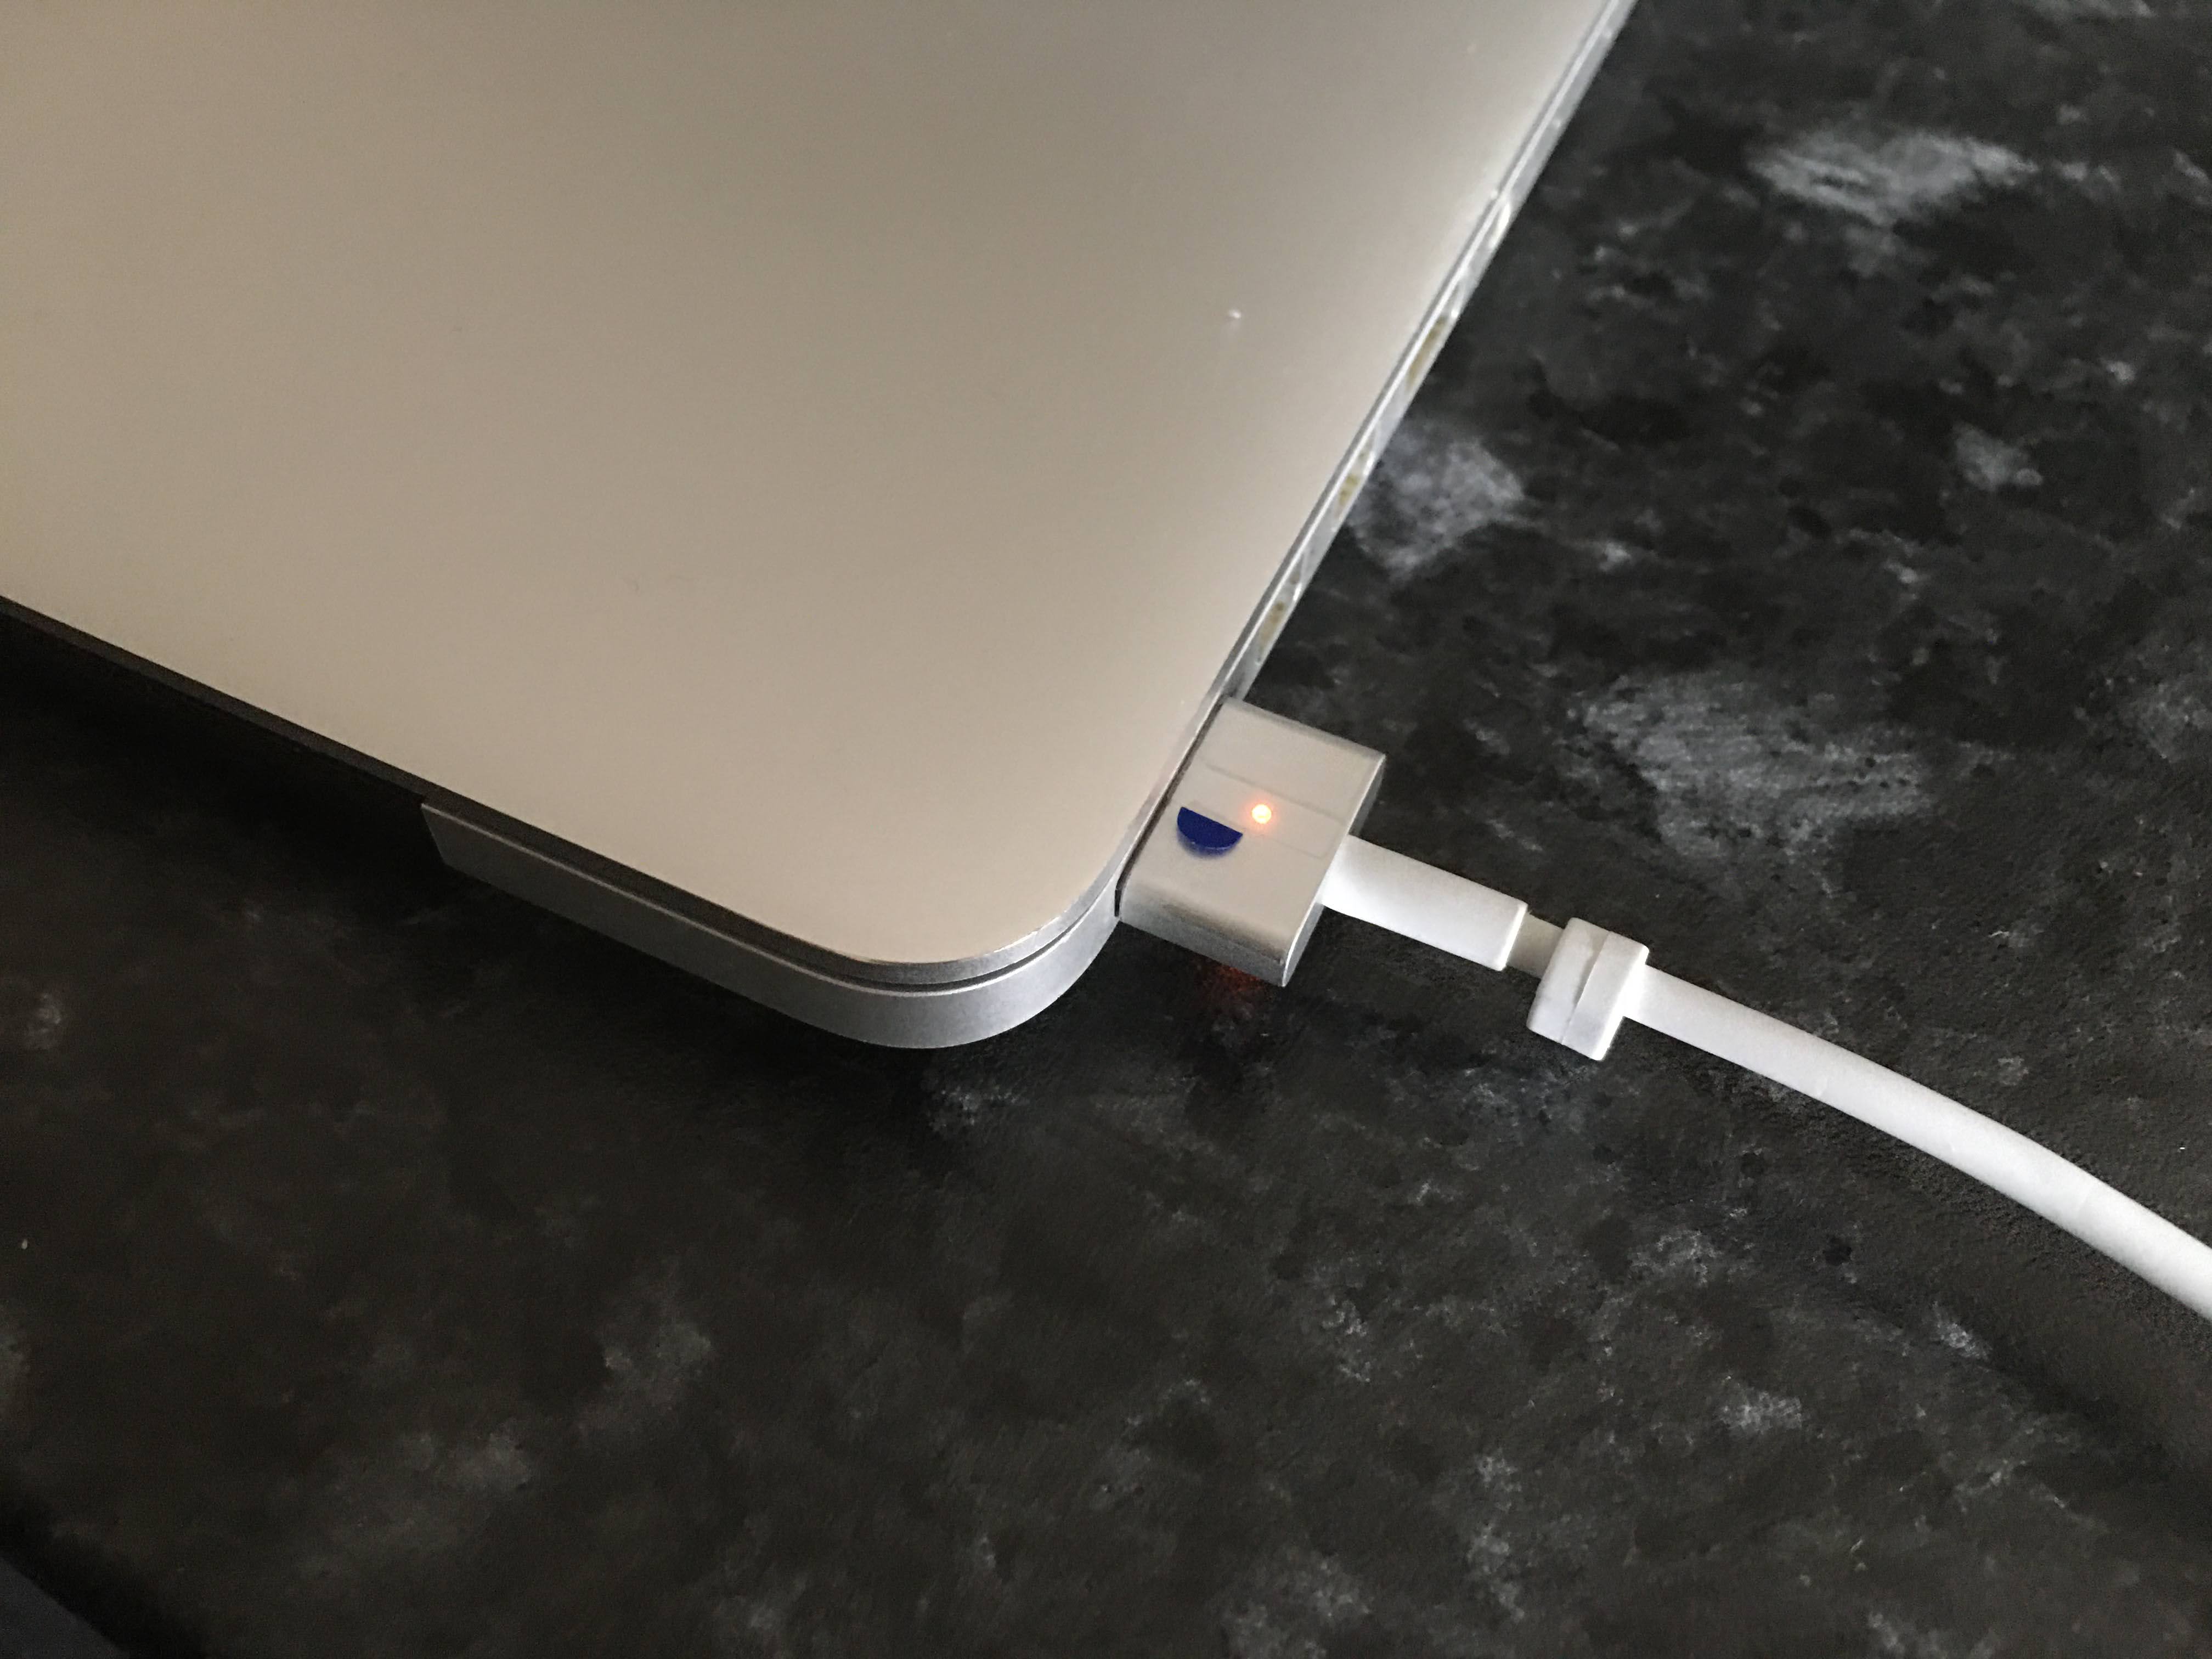 MagSafe Charger charging a Macbook